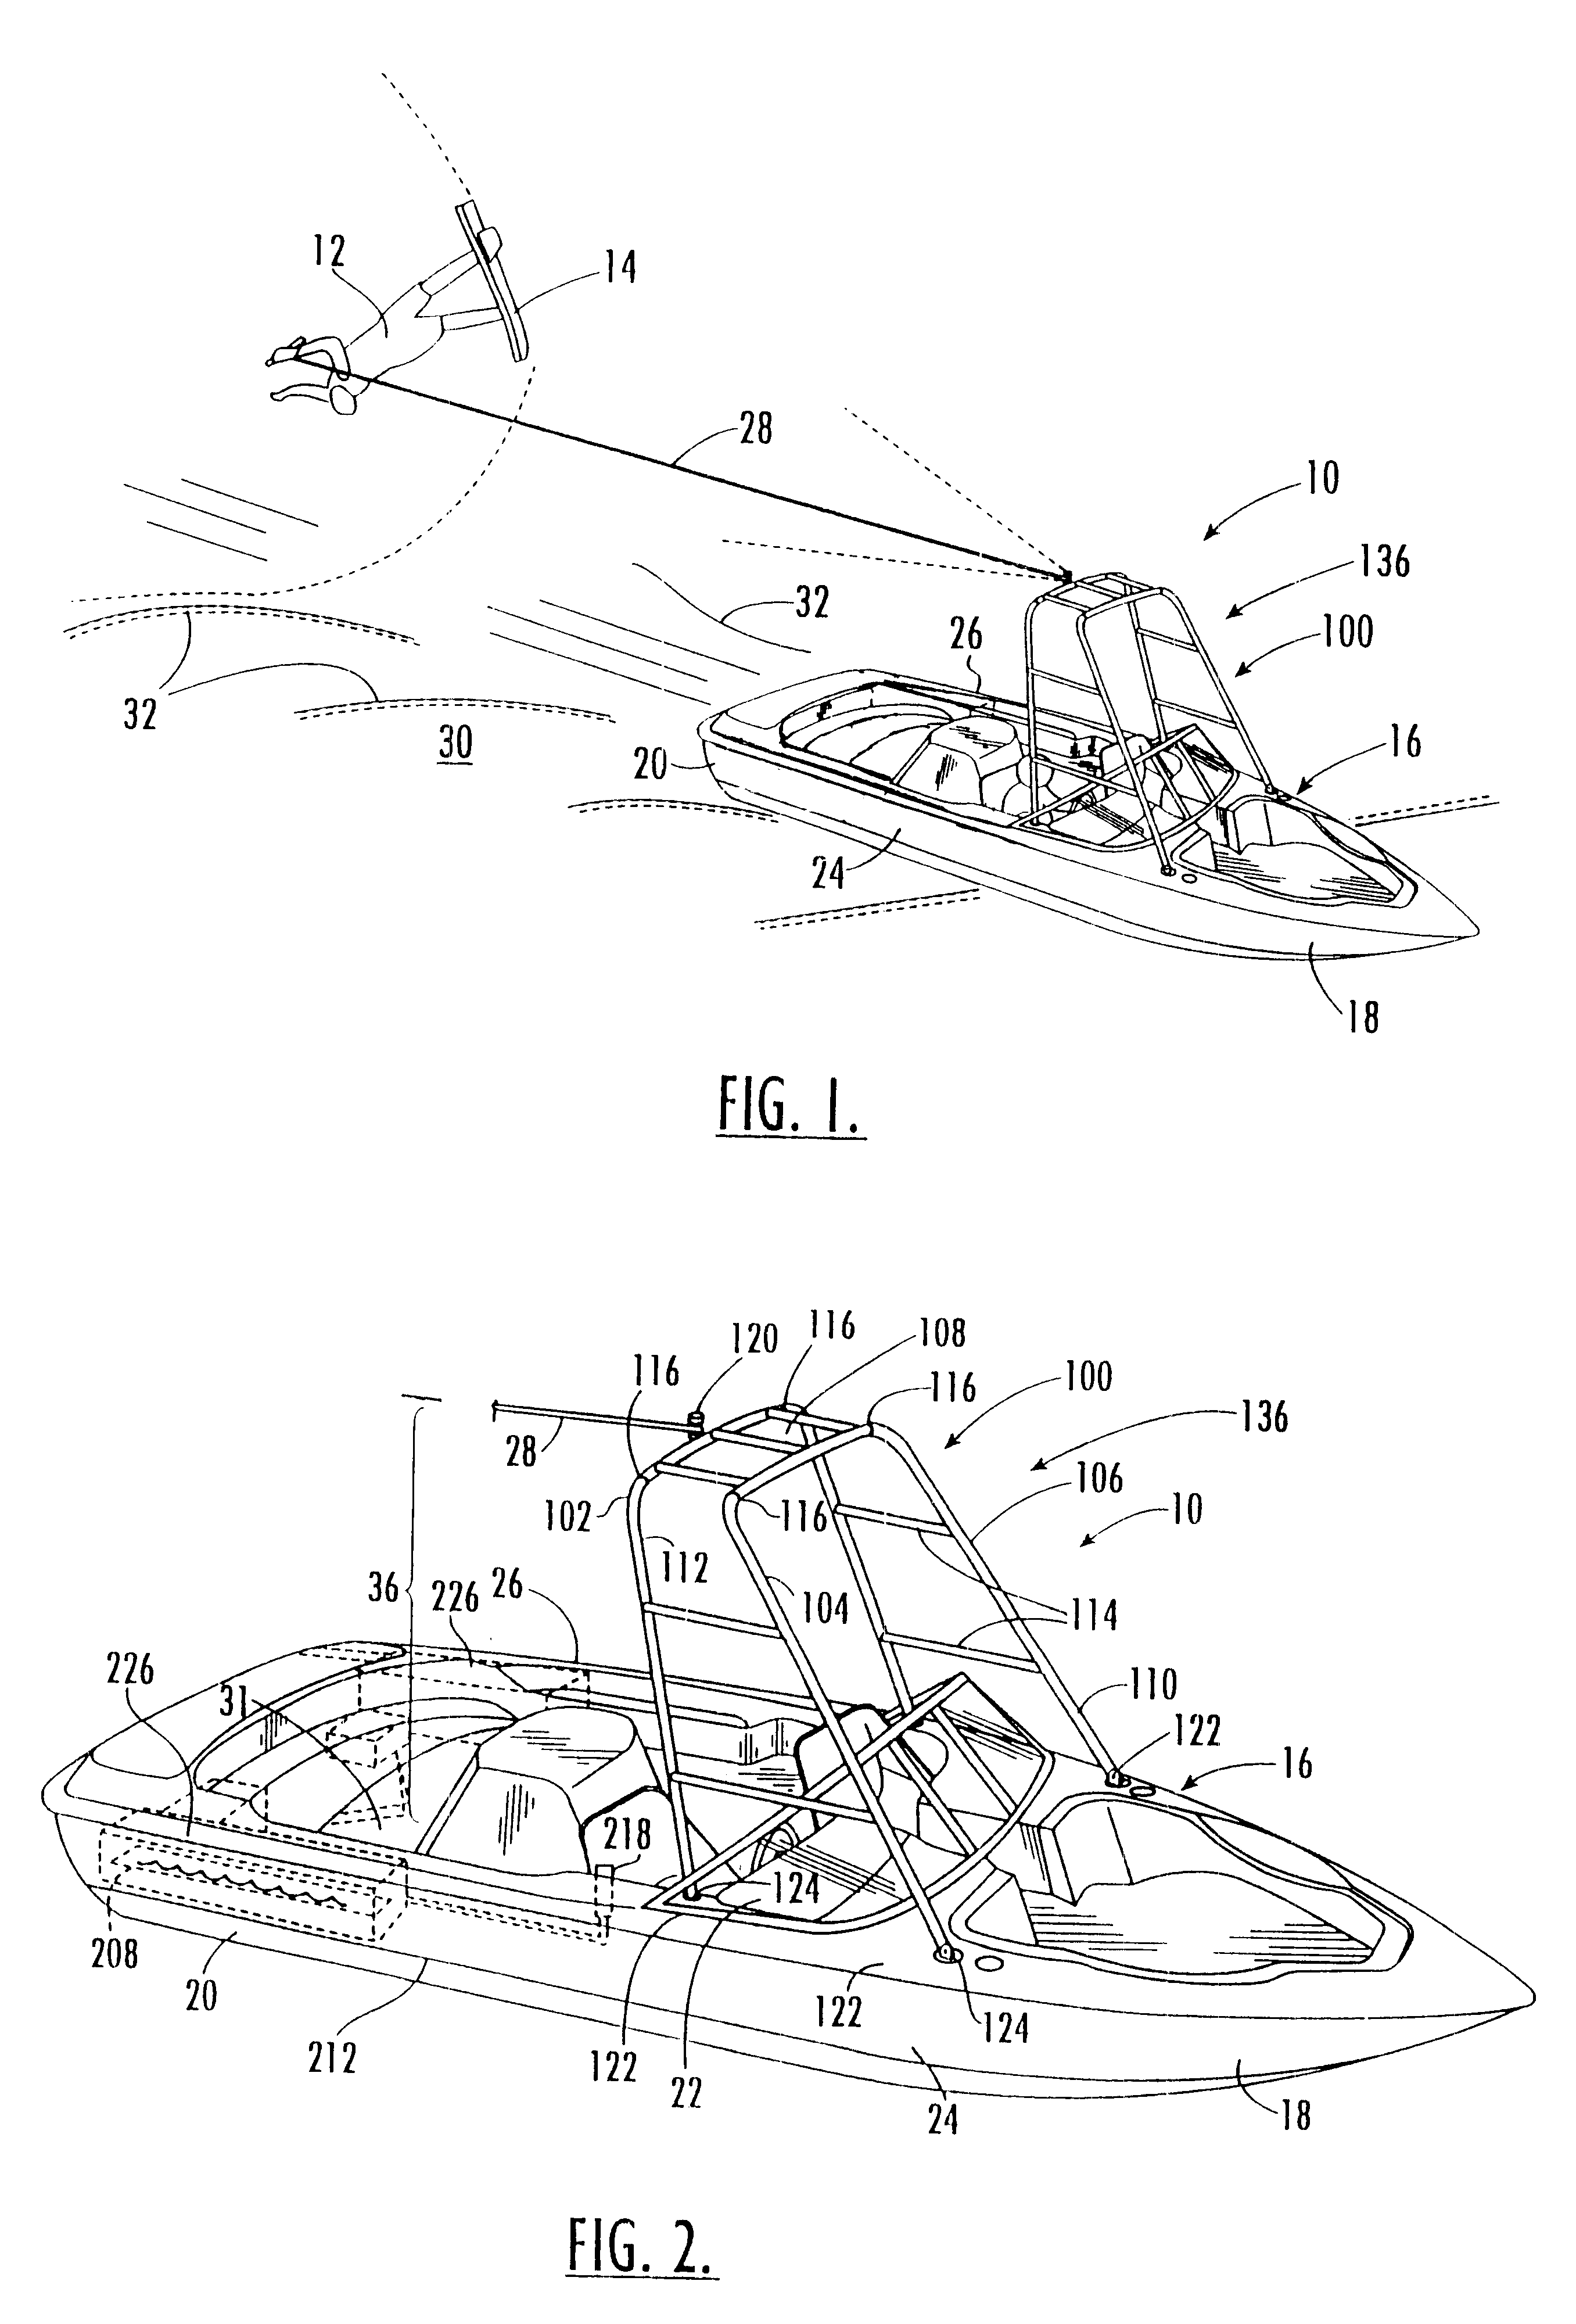 Water sport towing apparatus and method